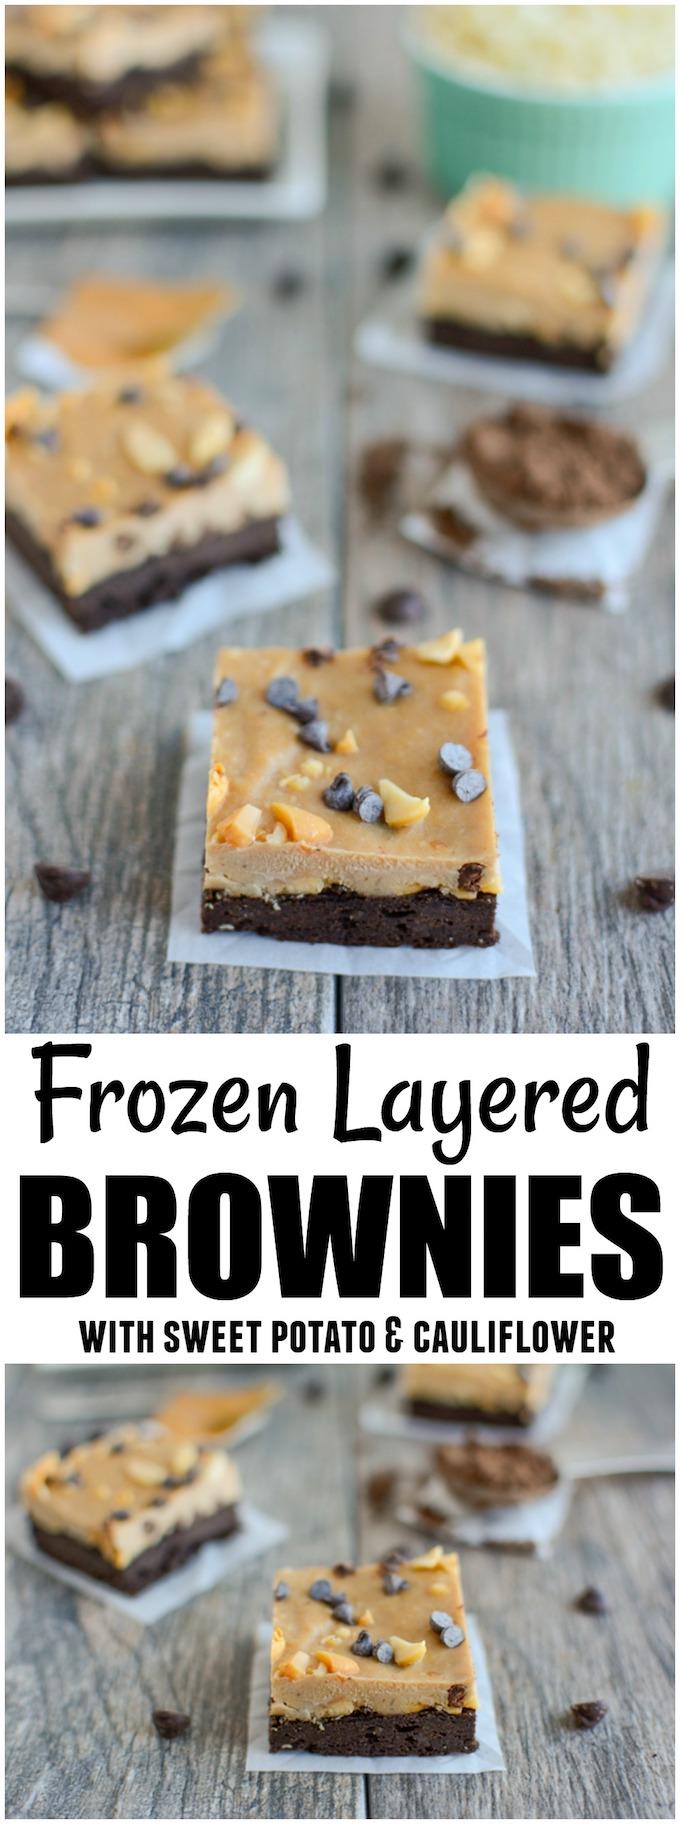 These dairy-free Frozen Layered Brownie Bars are perfect for dessert or an afternoon treat! They pair a layer of sweet potato brownies and a layer of peanut butter banana cream and even sneak in some cauliflower!